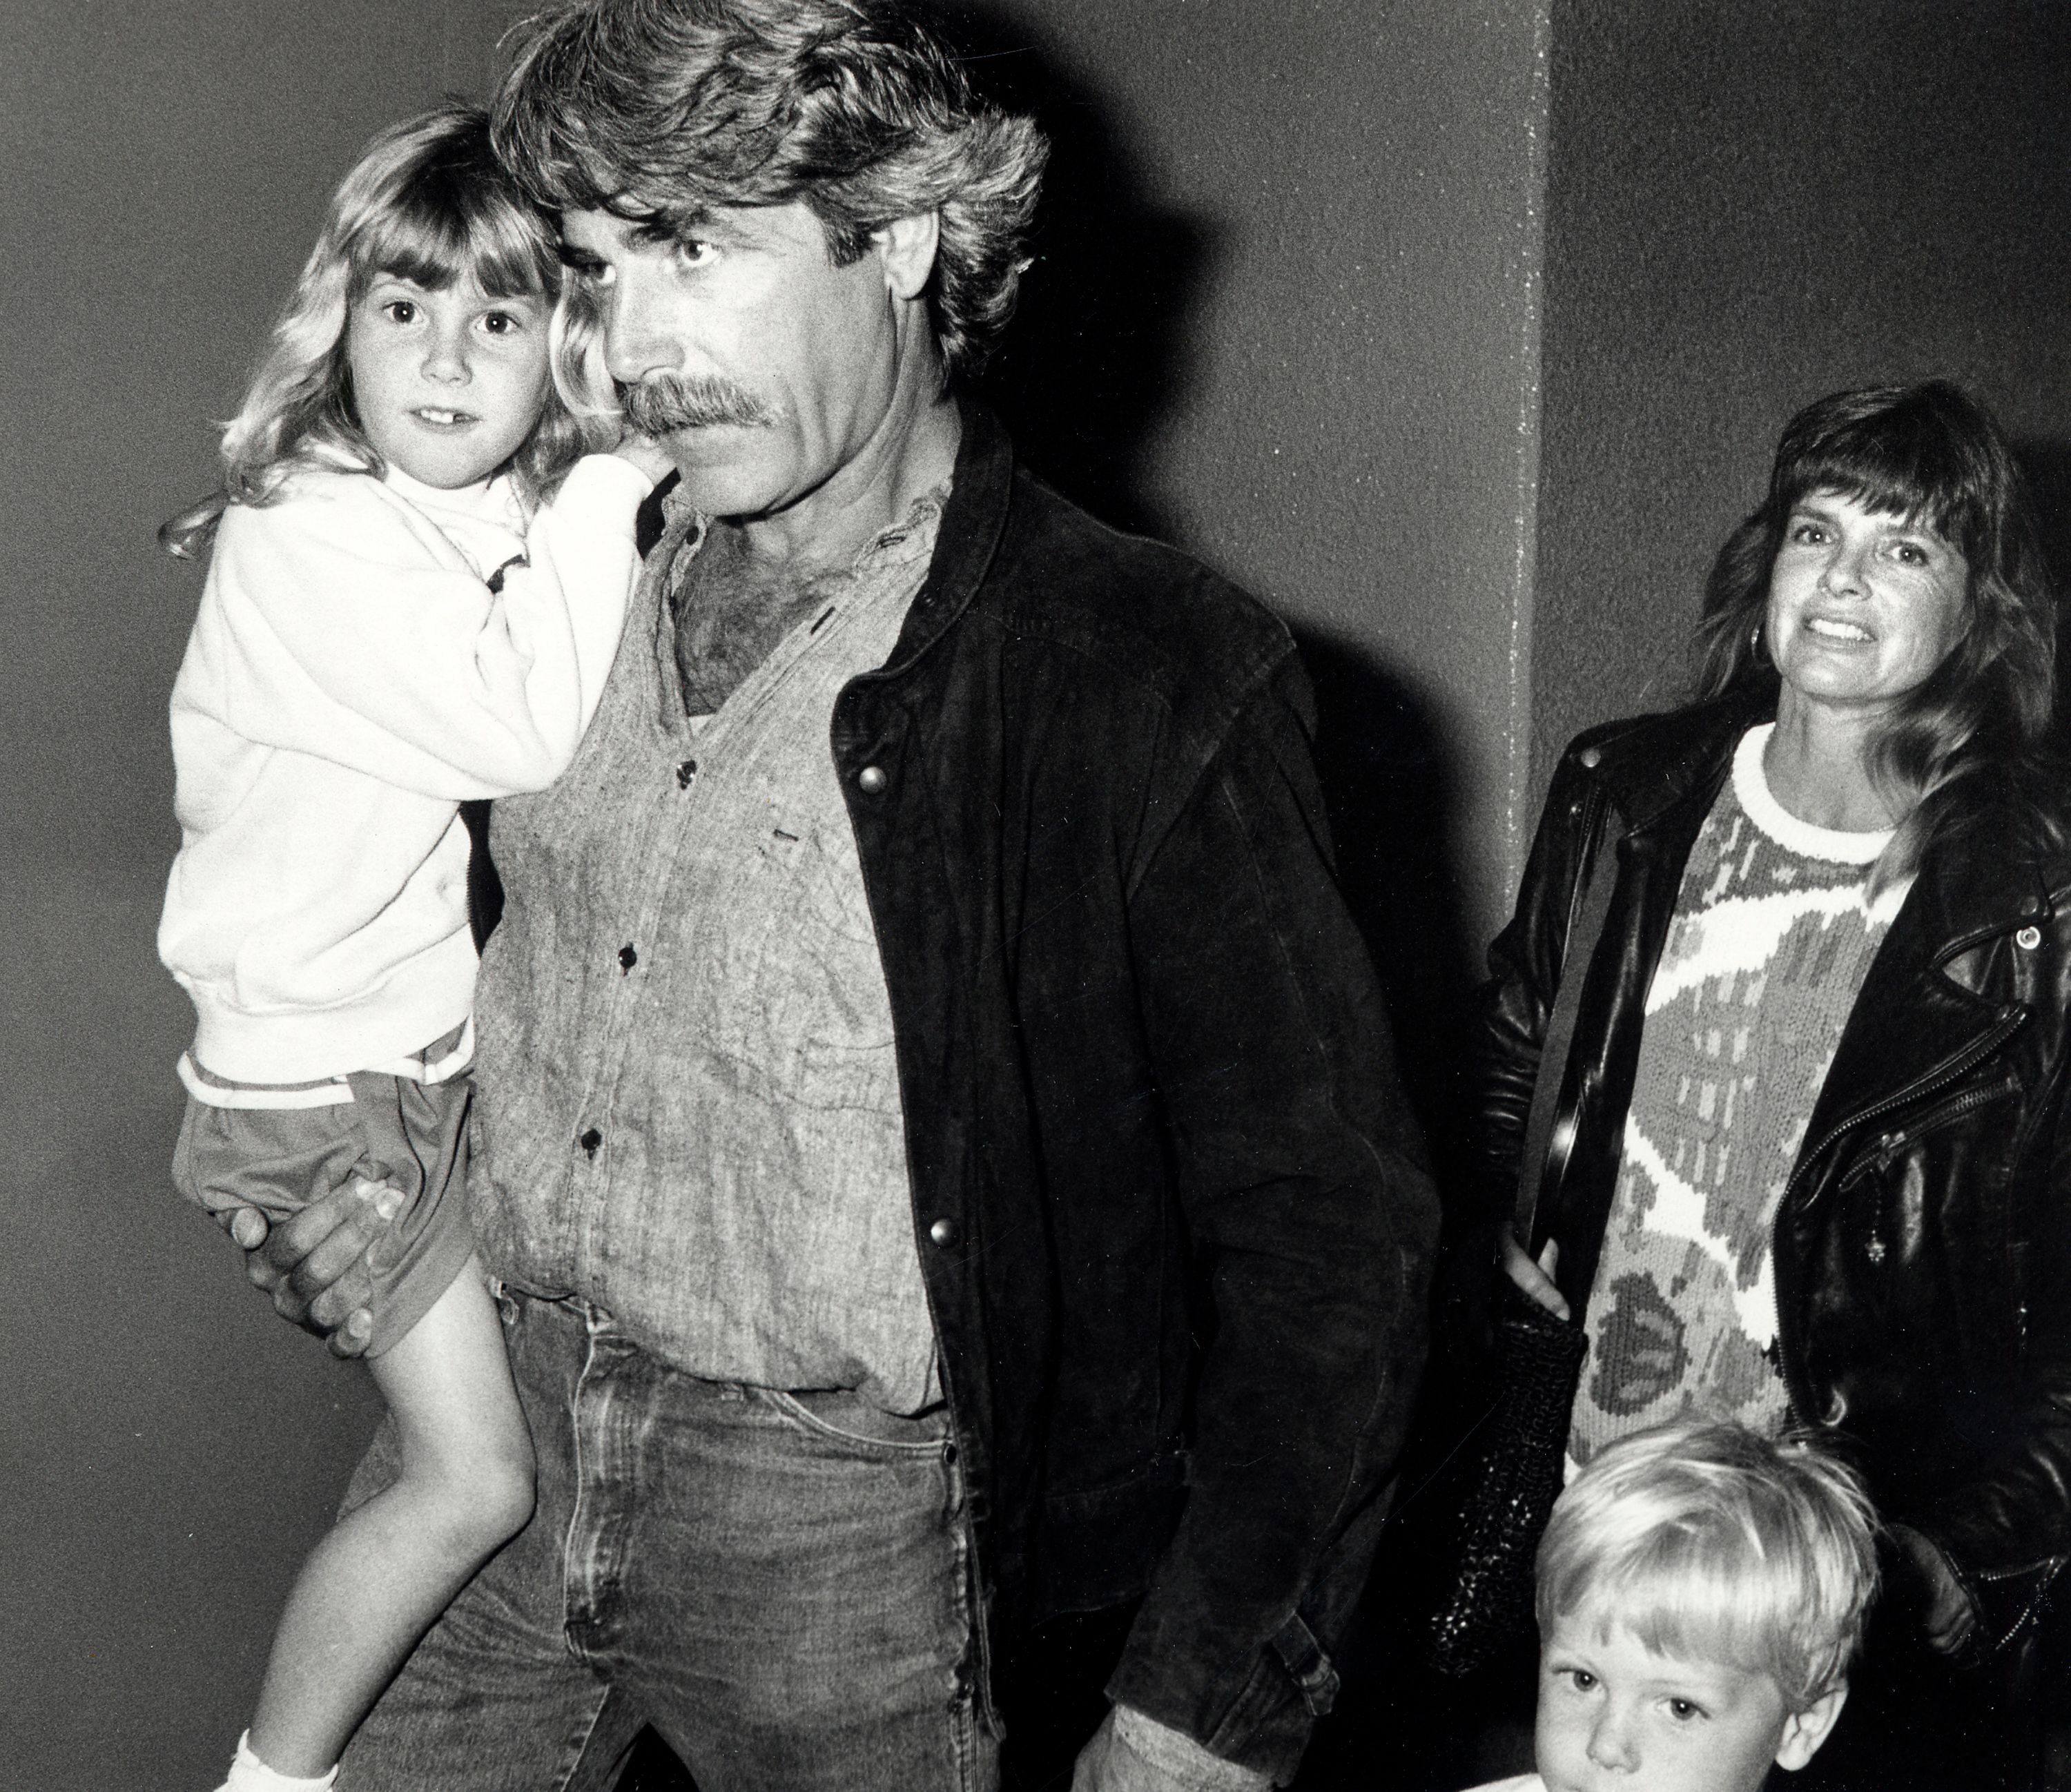 Actor Sam Elliott, actress Katharine Ross, and daughter Cleo Rose Elliott on March 14, 1990 at the Great Western Forum in Inglewood, California. | Source: Getty Images